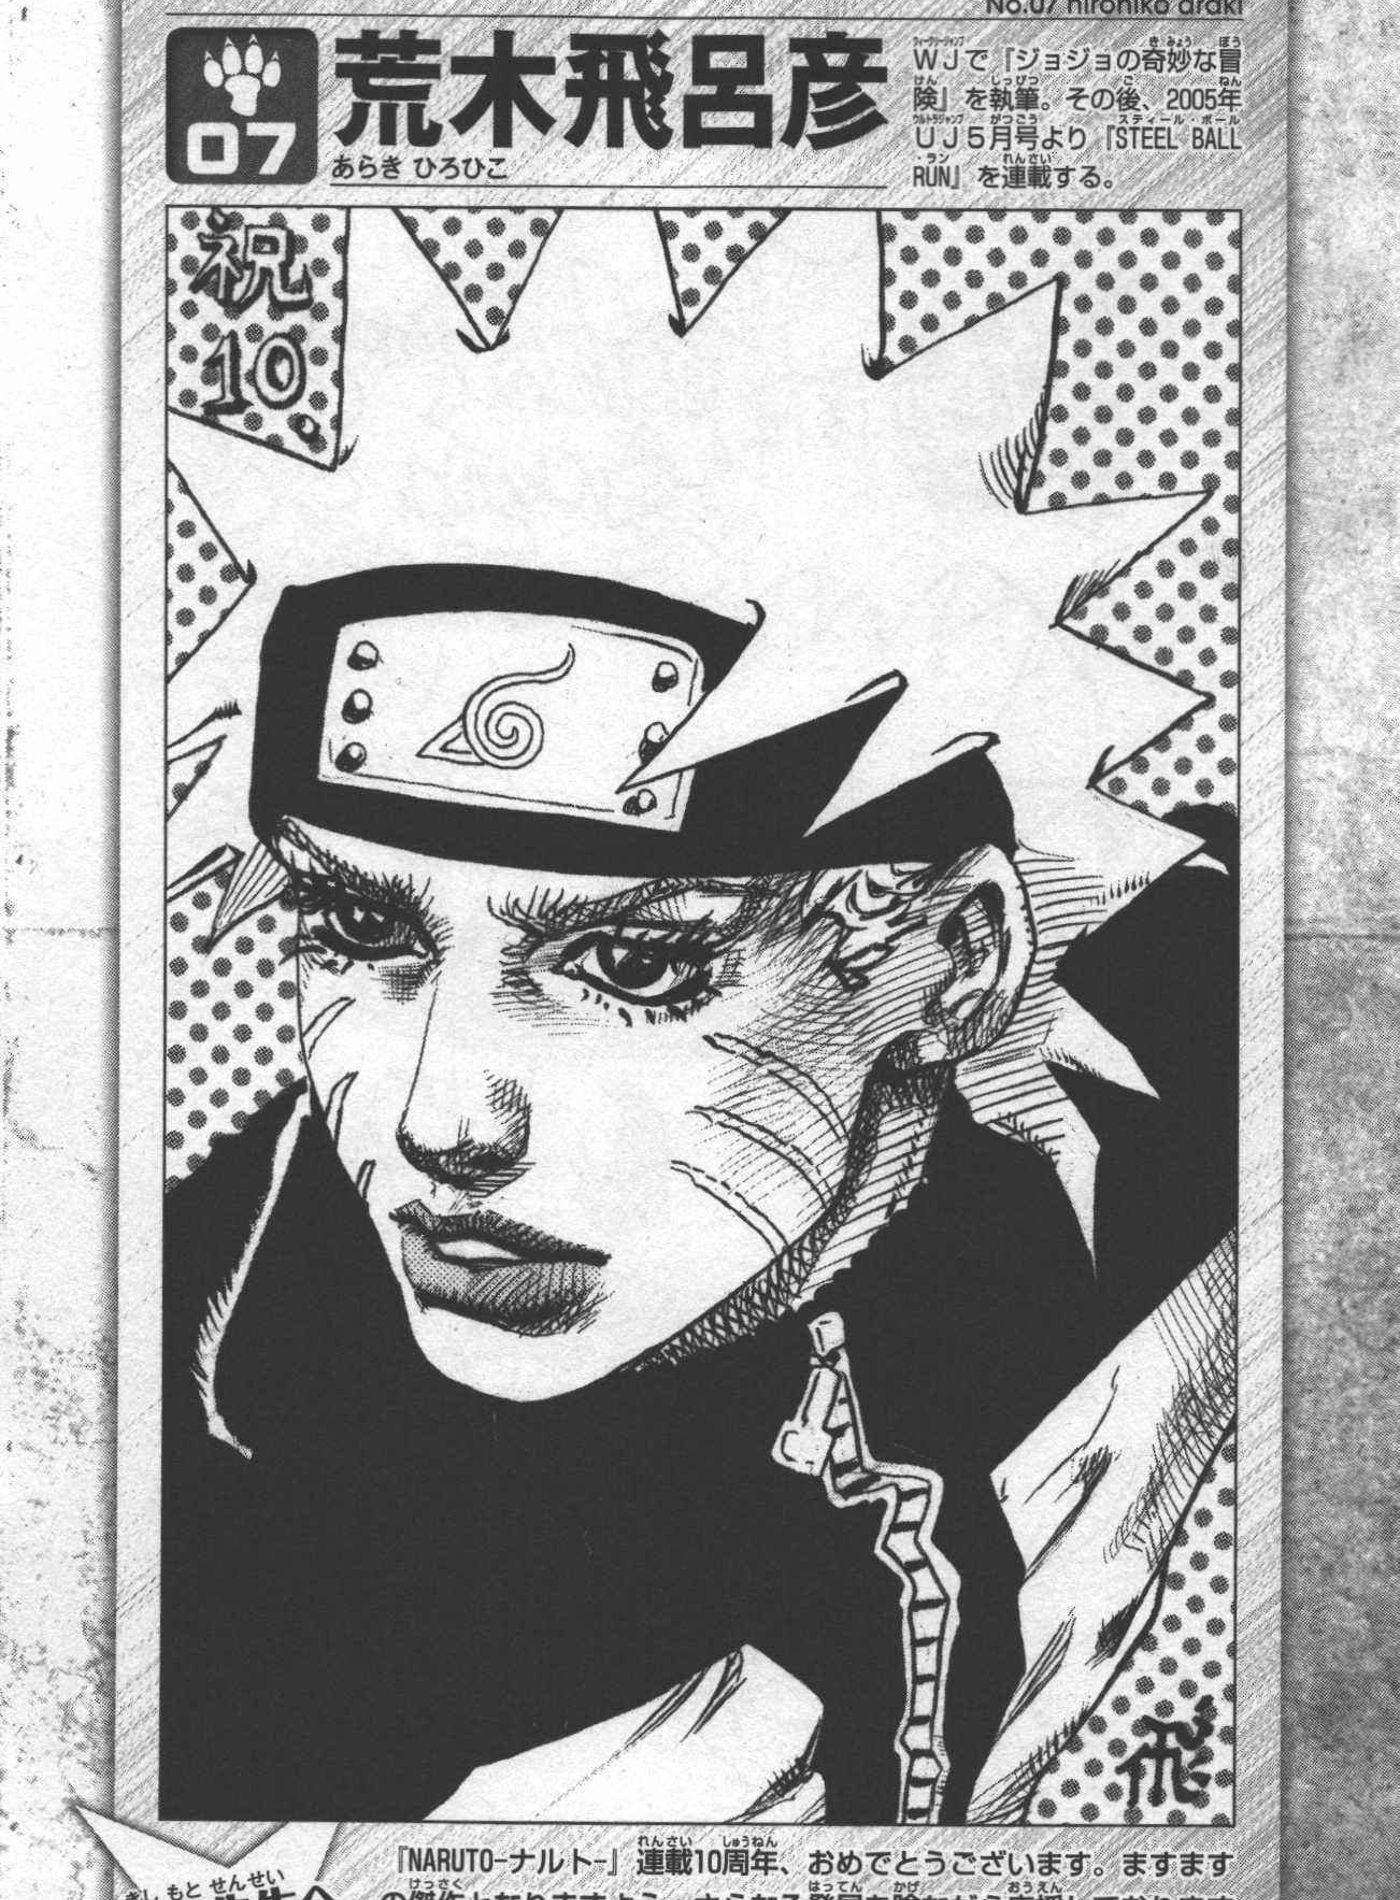 Why Naruto Fans are Divided on Art By Jojo’s Bizarre Adventure Creator